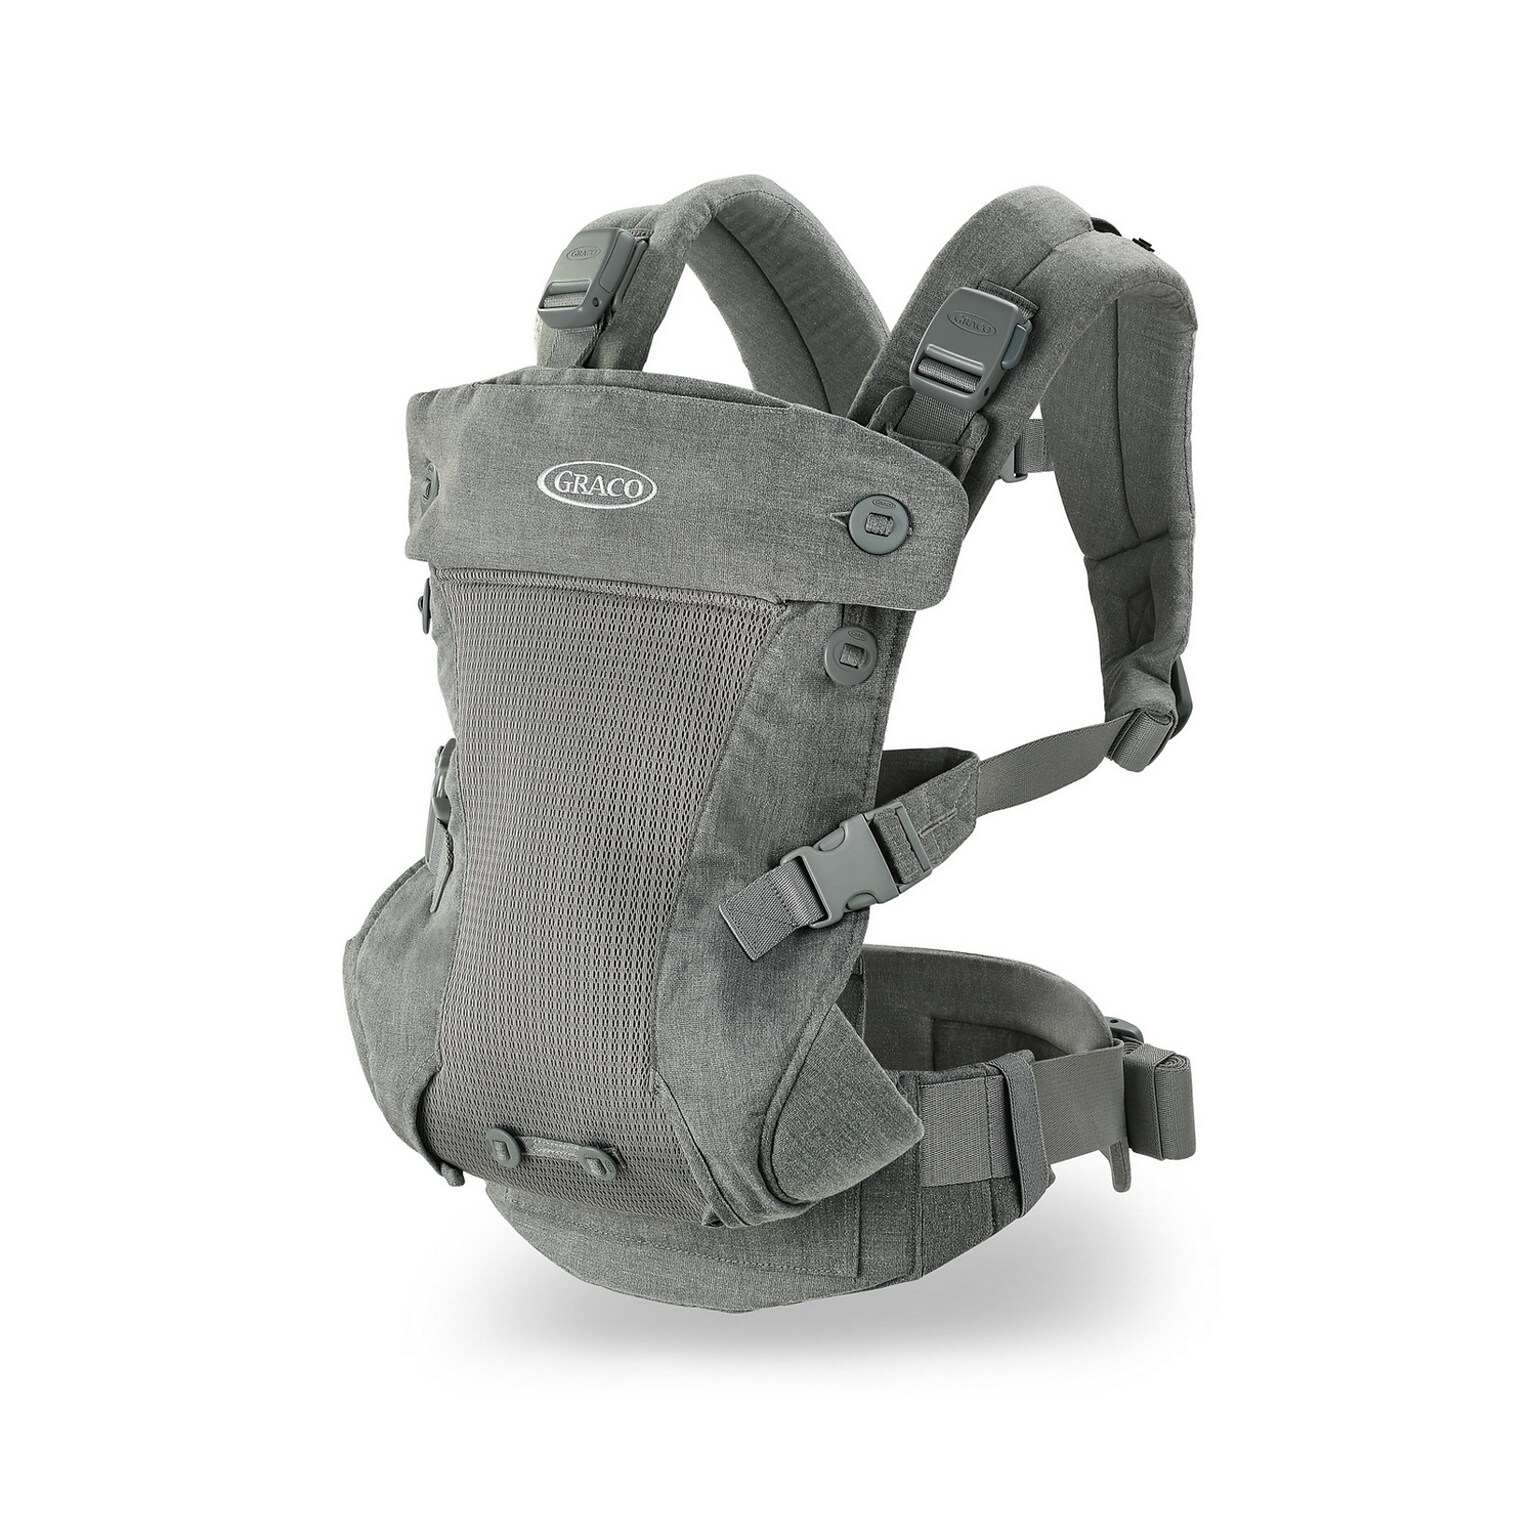 Graco Cradle Me 4-in-1 Carrier, Mineral Gray 2121150)